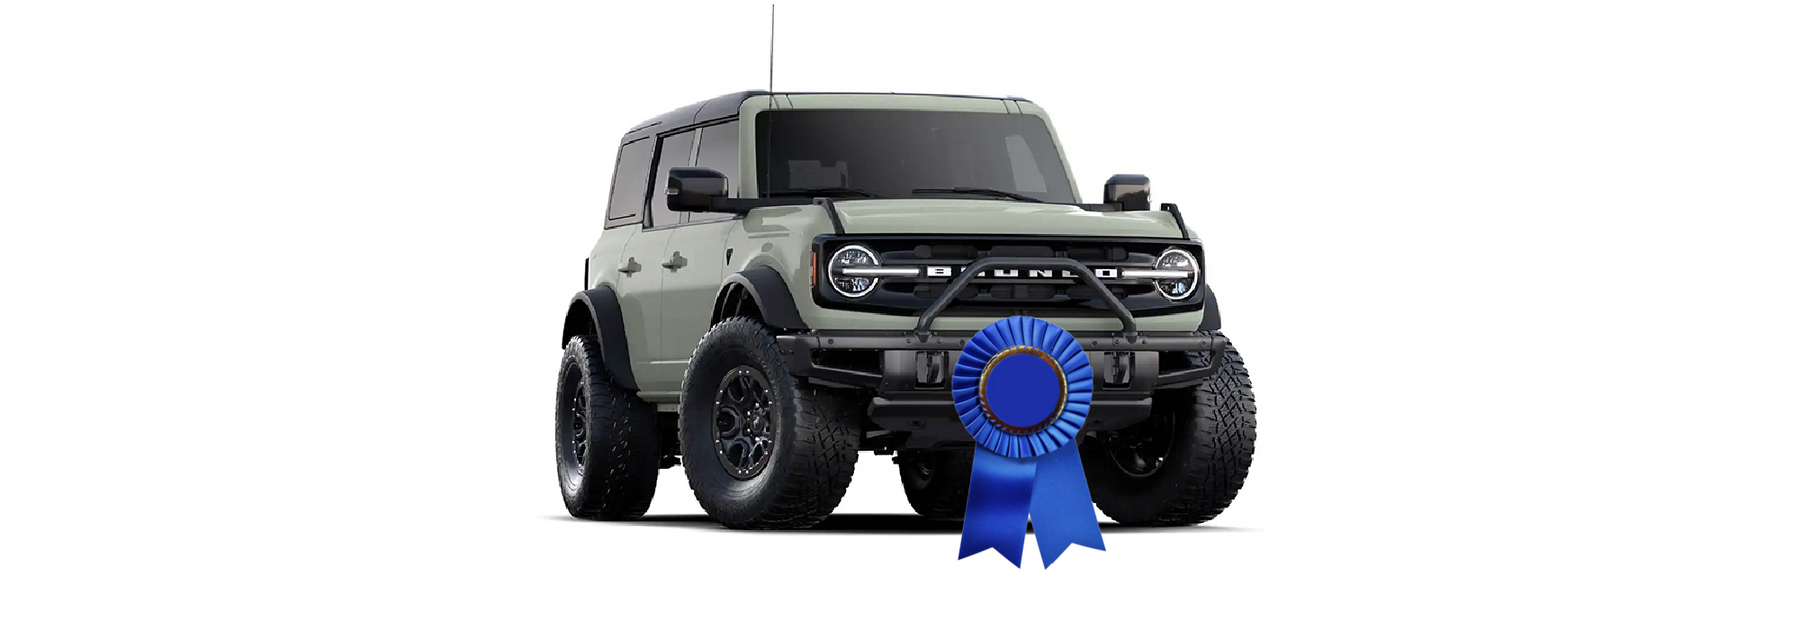 The Reviews for the Bronco Are In . . . . and Ford Has to be VERY Happy